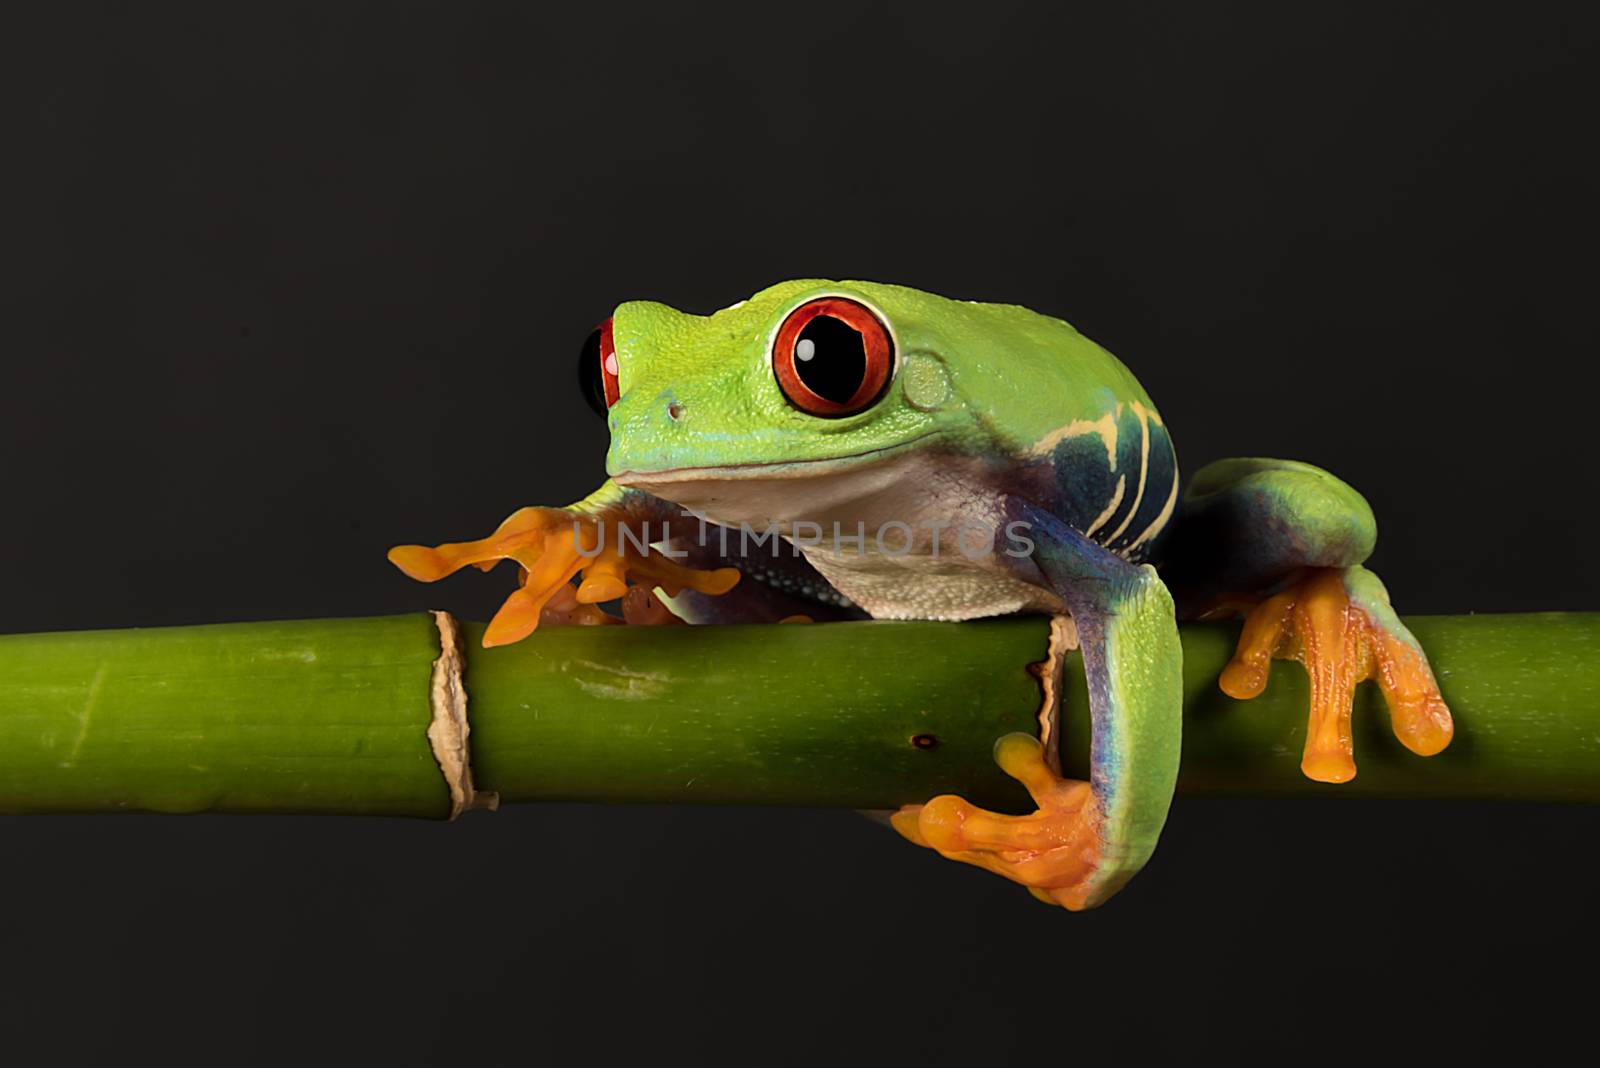 Red-eyed tree frog by alan_tunnicliffe